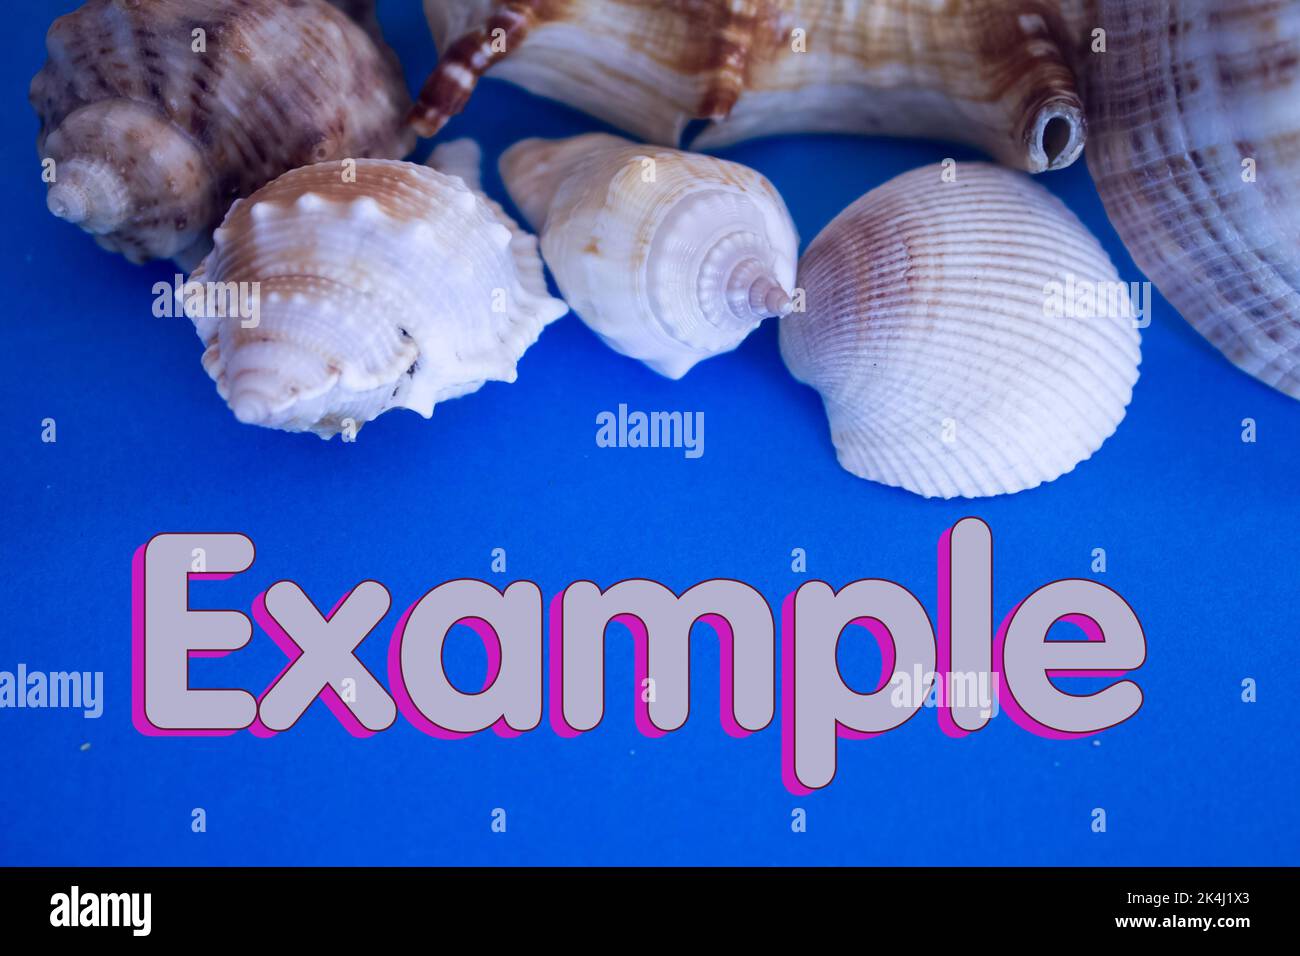 Animal Shell, Summer vacation, marine background with Example text. Stock Photo